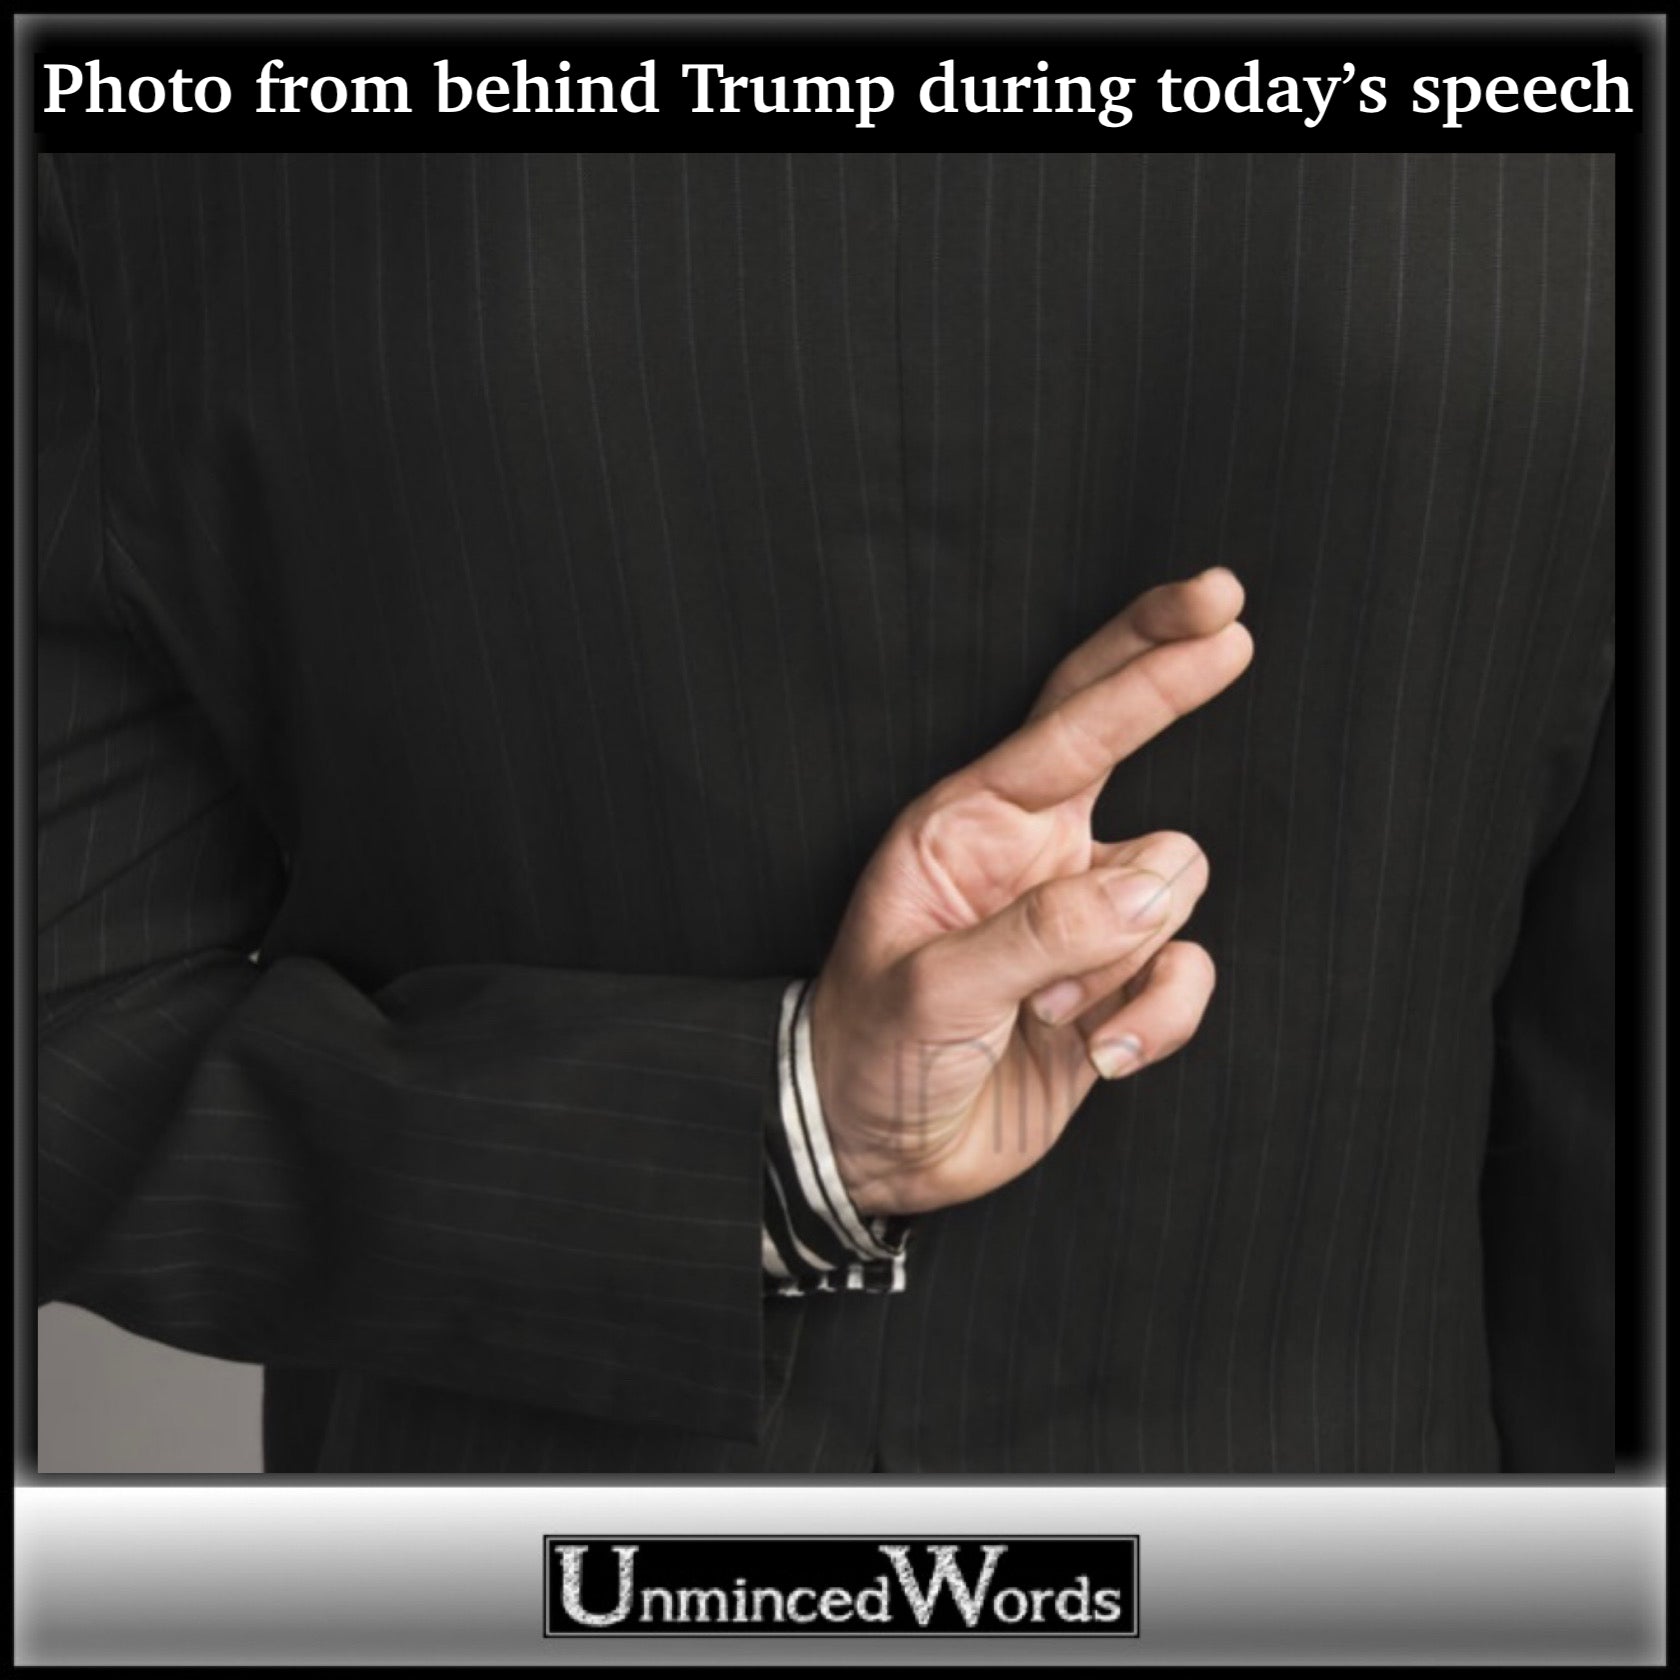 ‪PHOTO TAKEN FROM BEHIND TRUMP DURING TODAY’S SPEECH